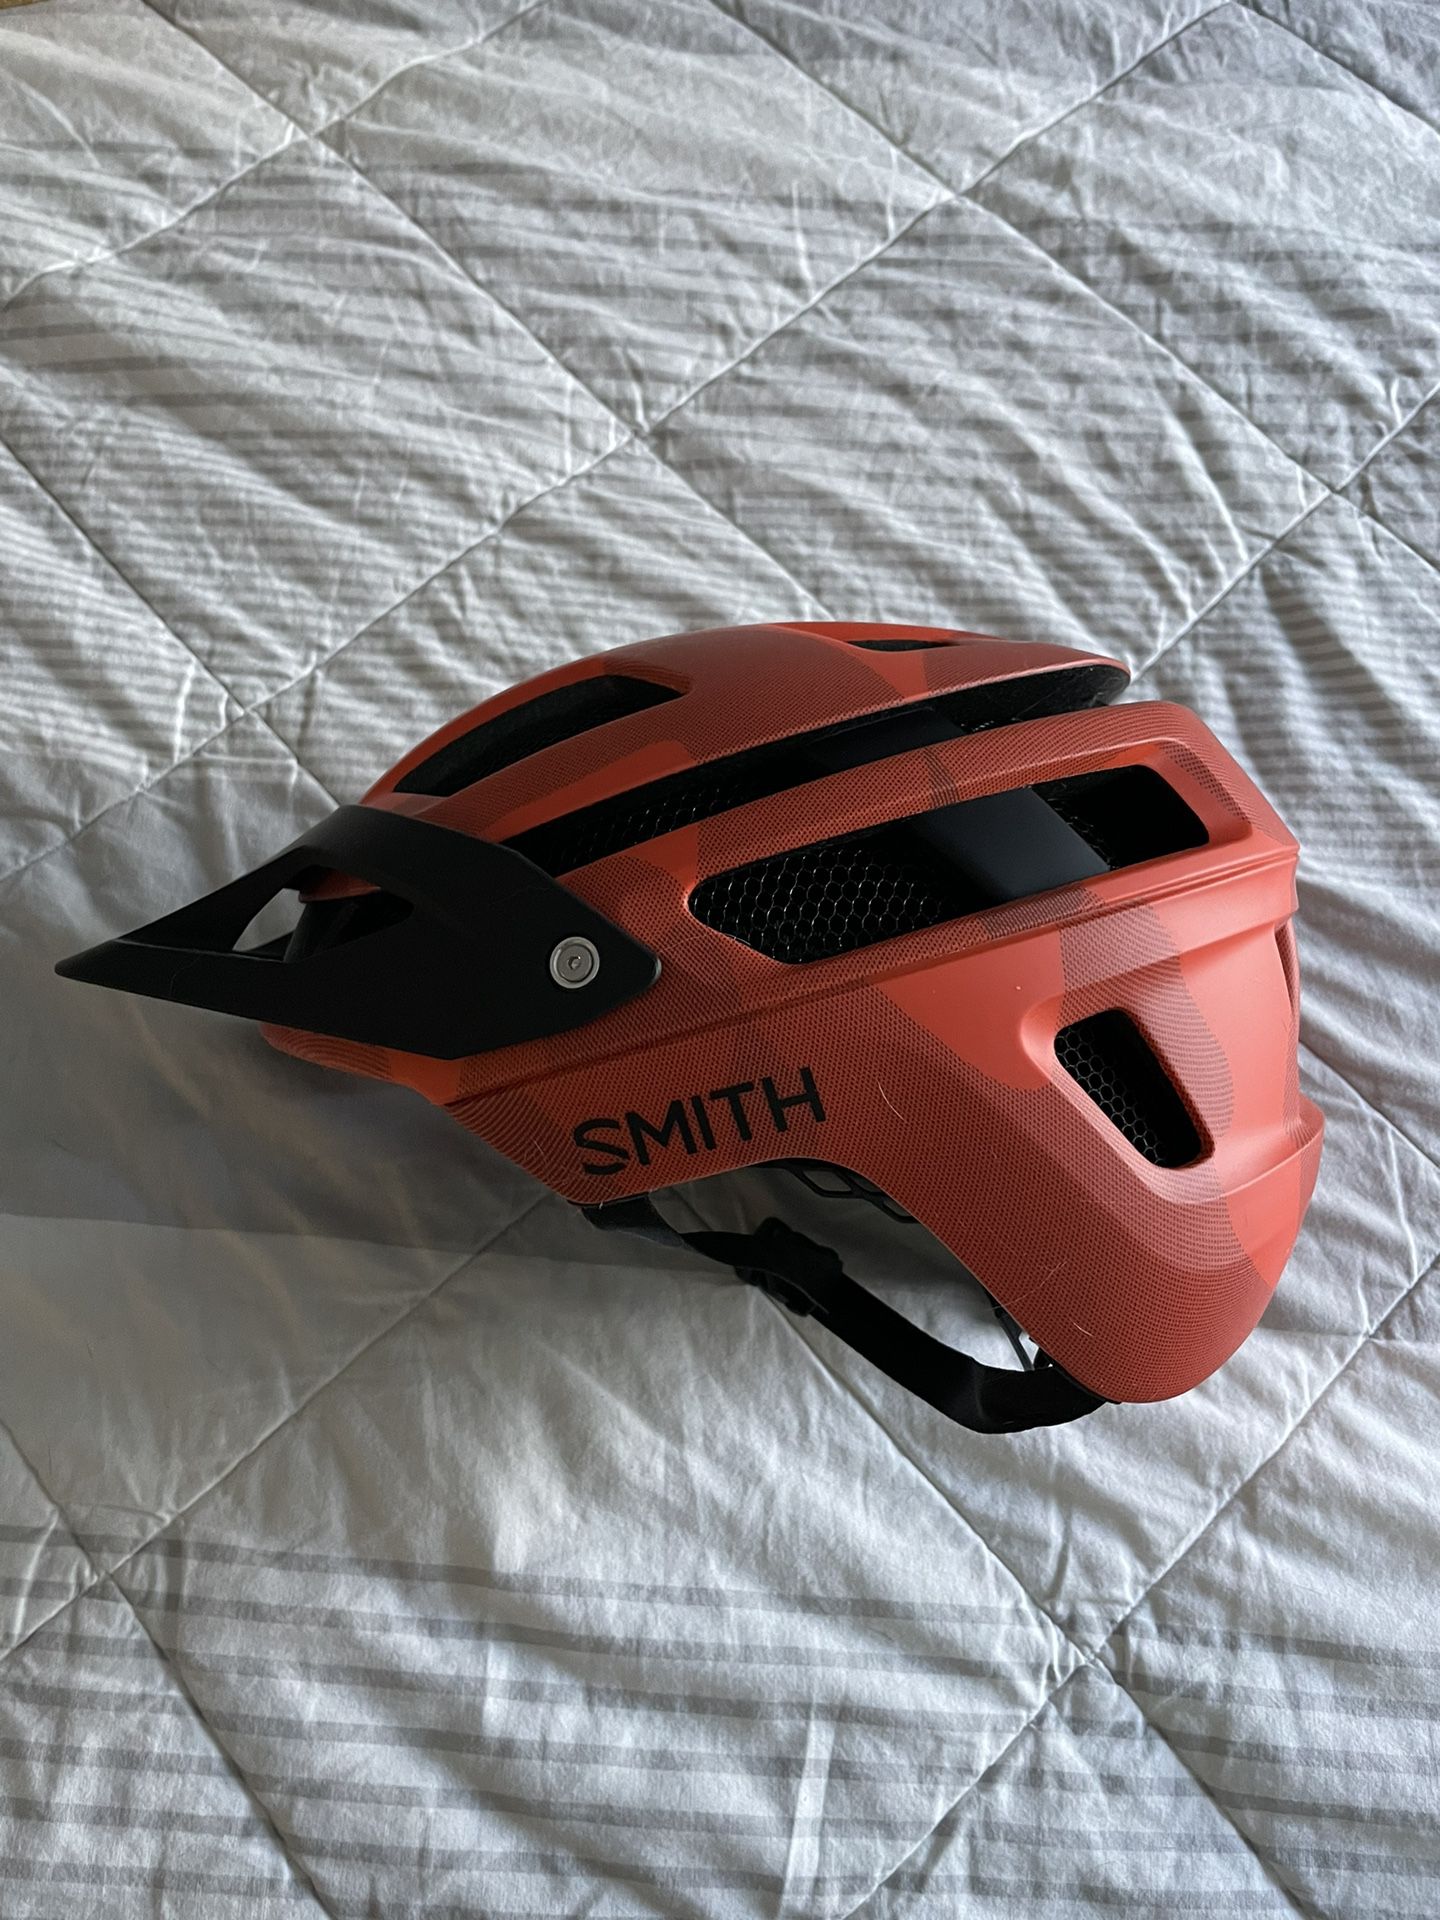 Smith Forefront 2 helmet 